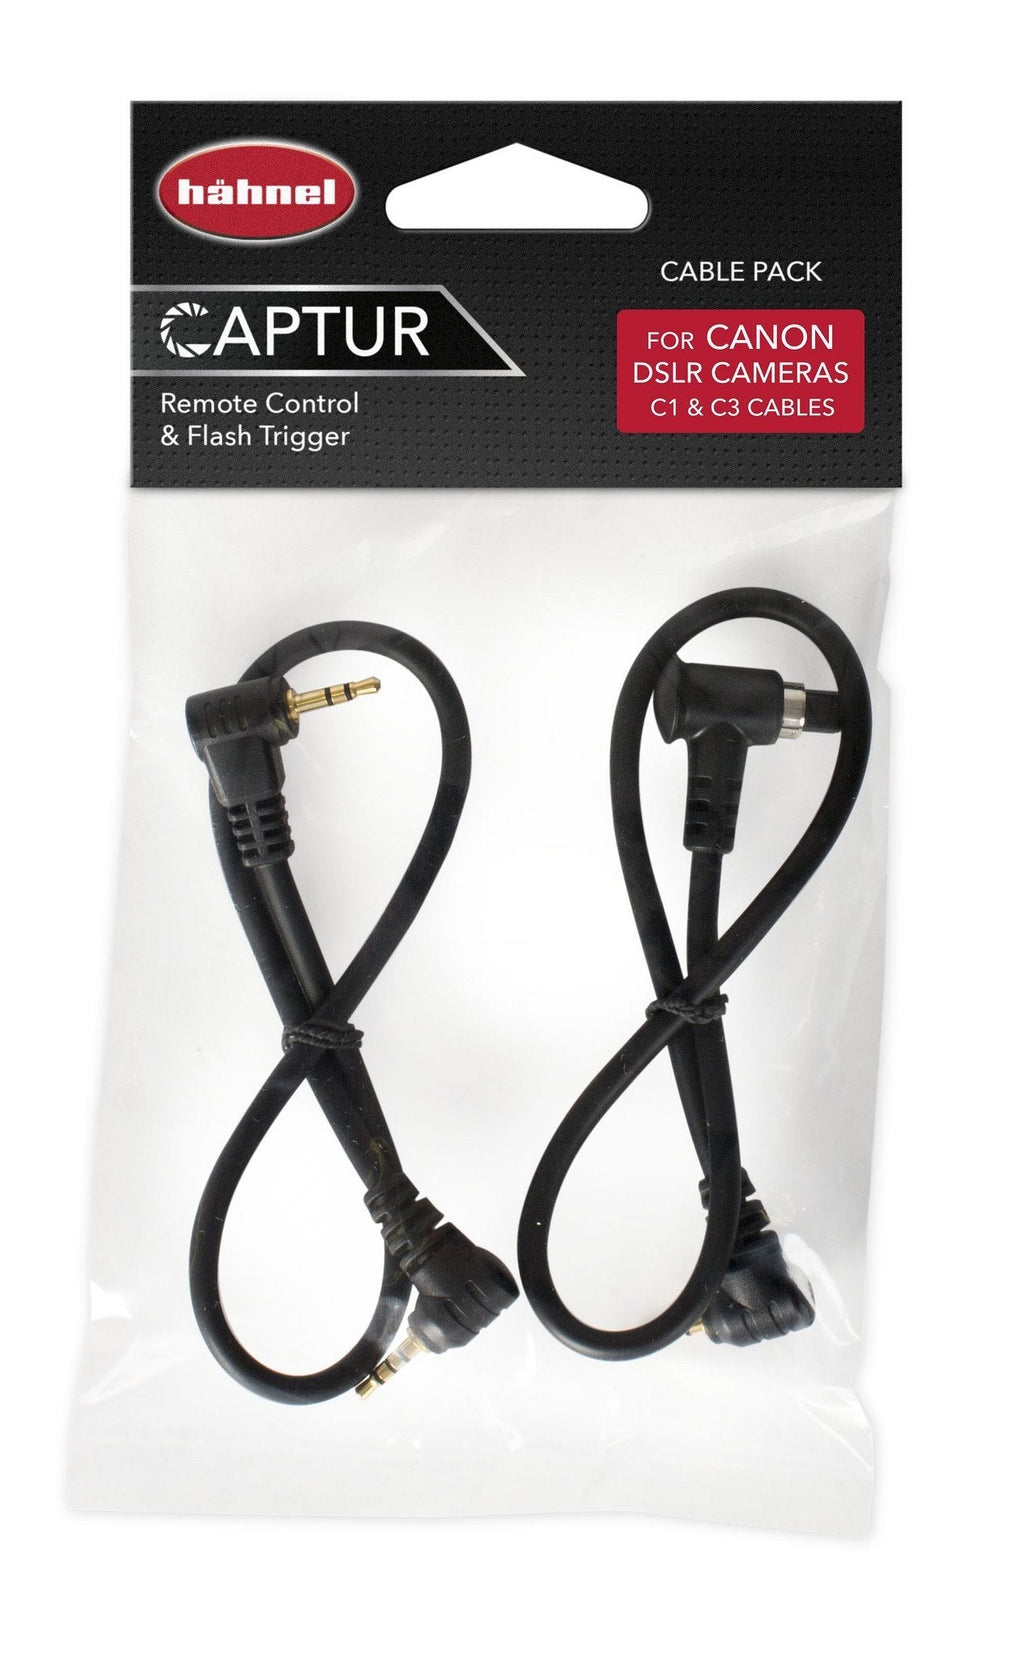 Hahnel HL -CAPCORD C Canon Capcord Cable Set for Captur & Giga, Black